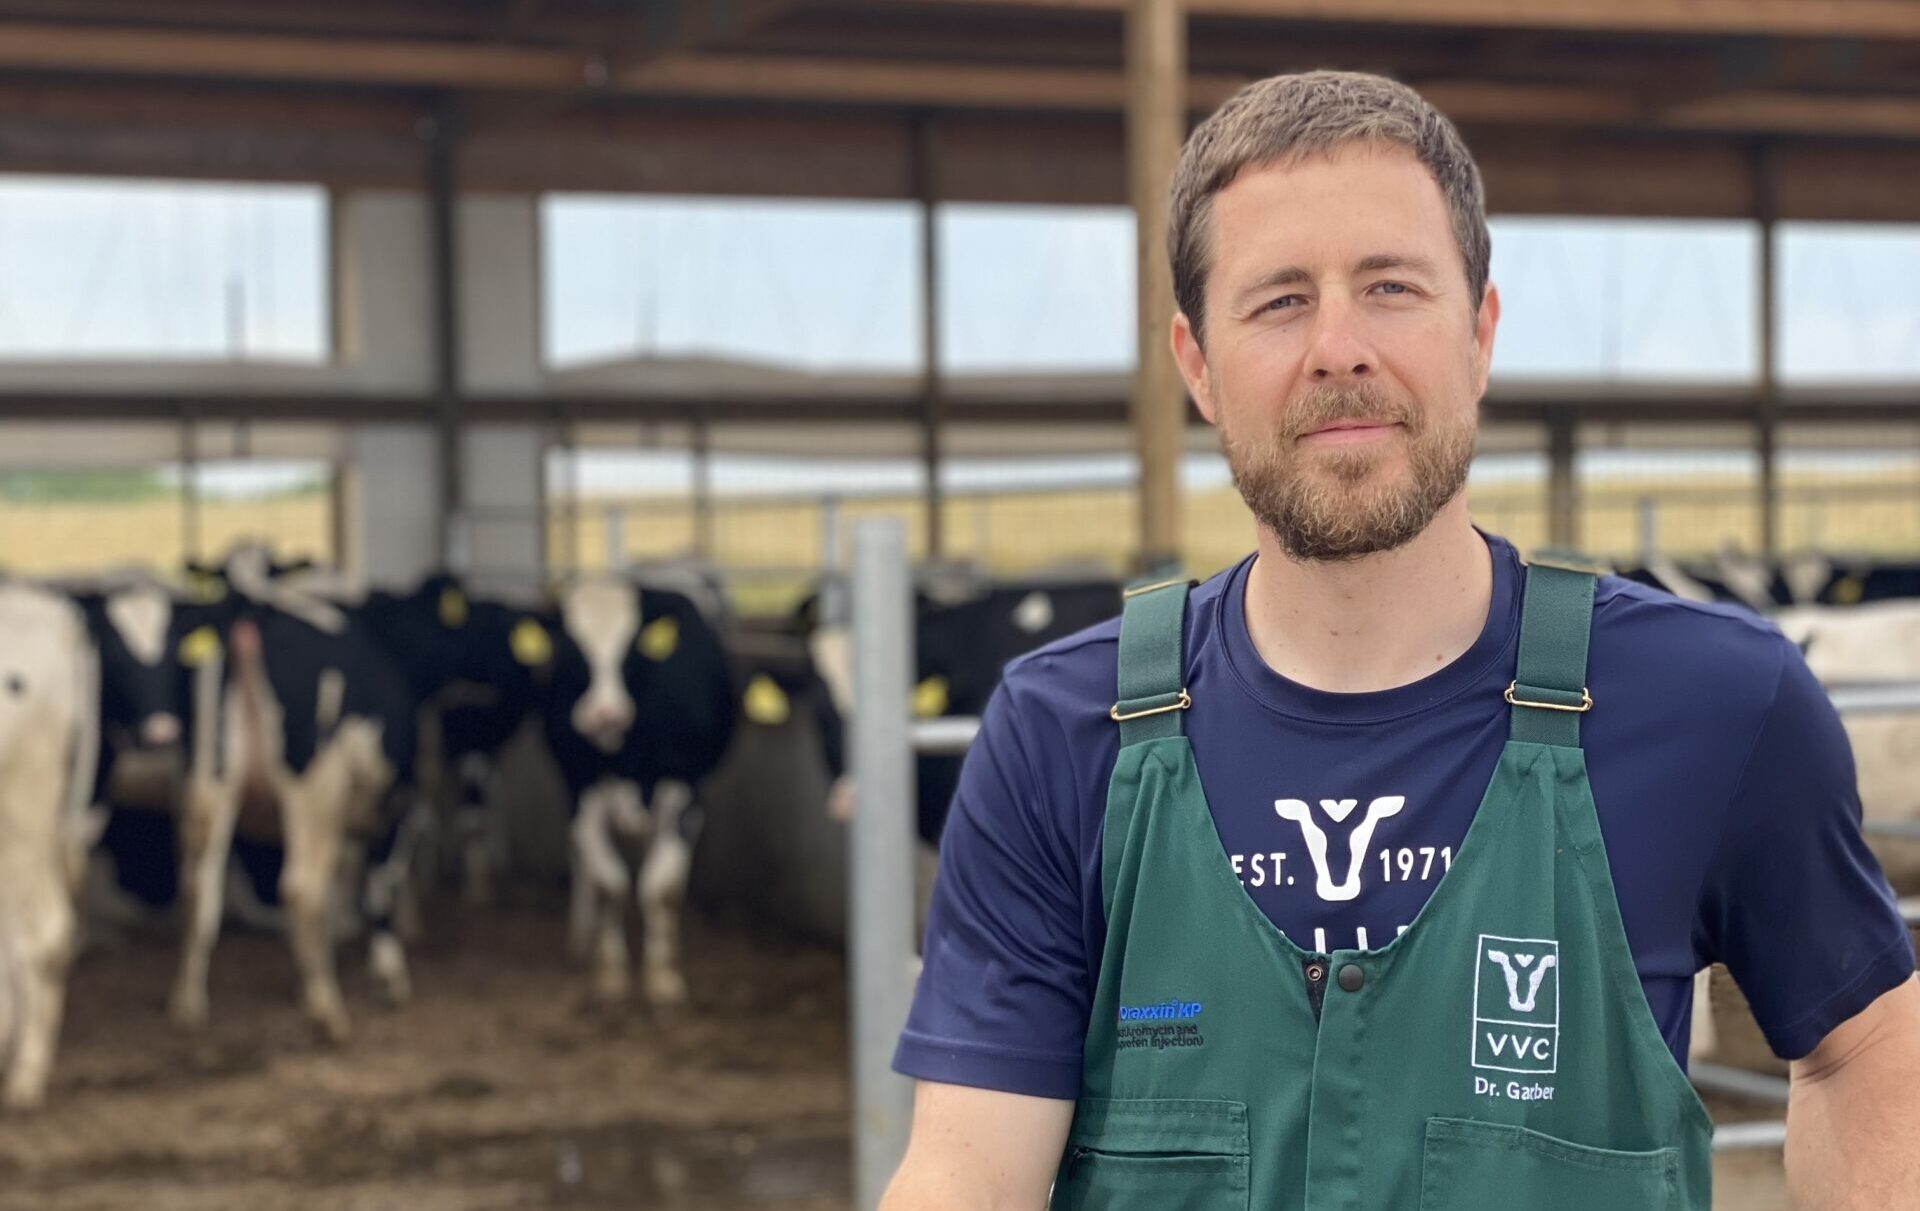 Dr. Jon Garber, a cattle veterinarian, stands in front of cows.